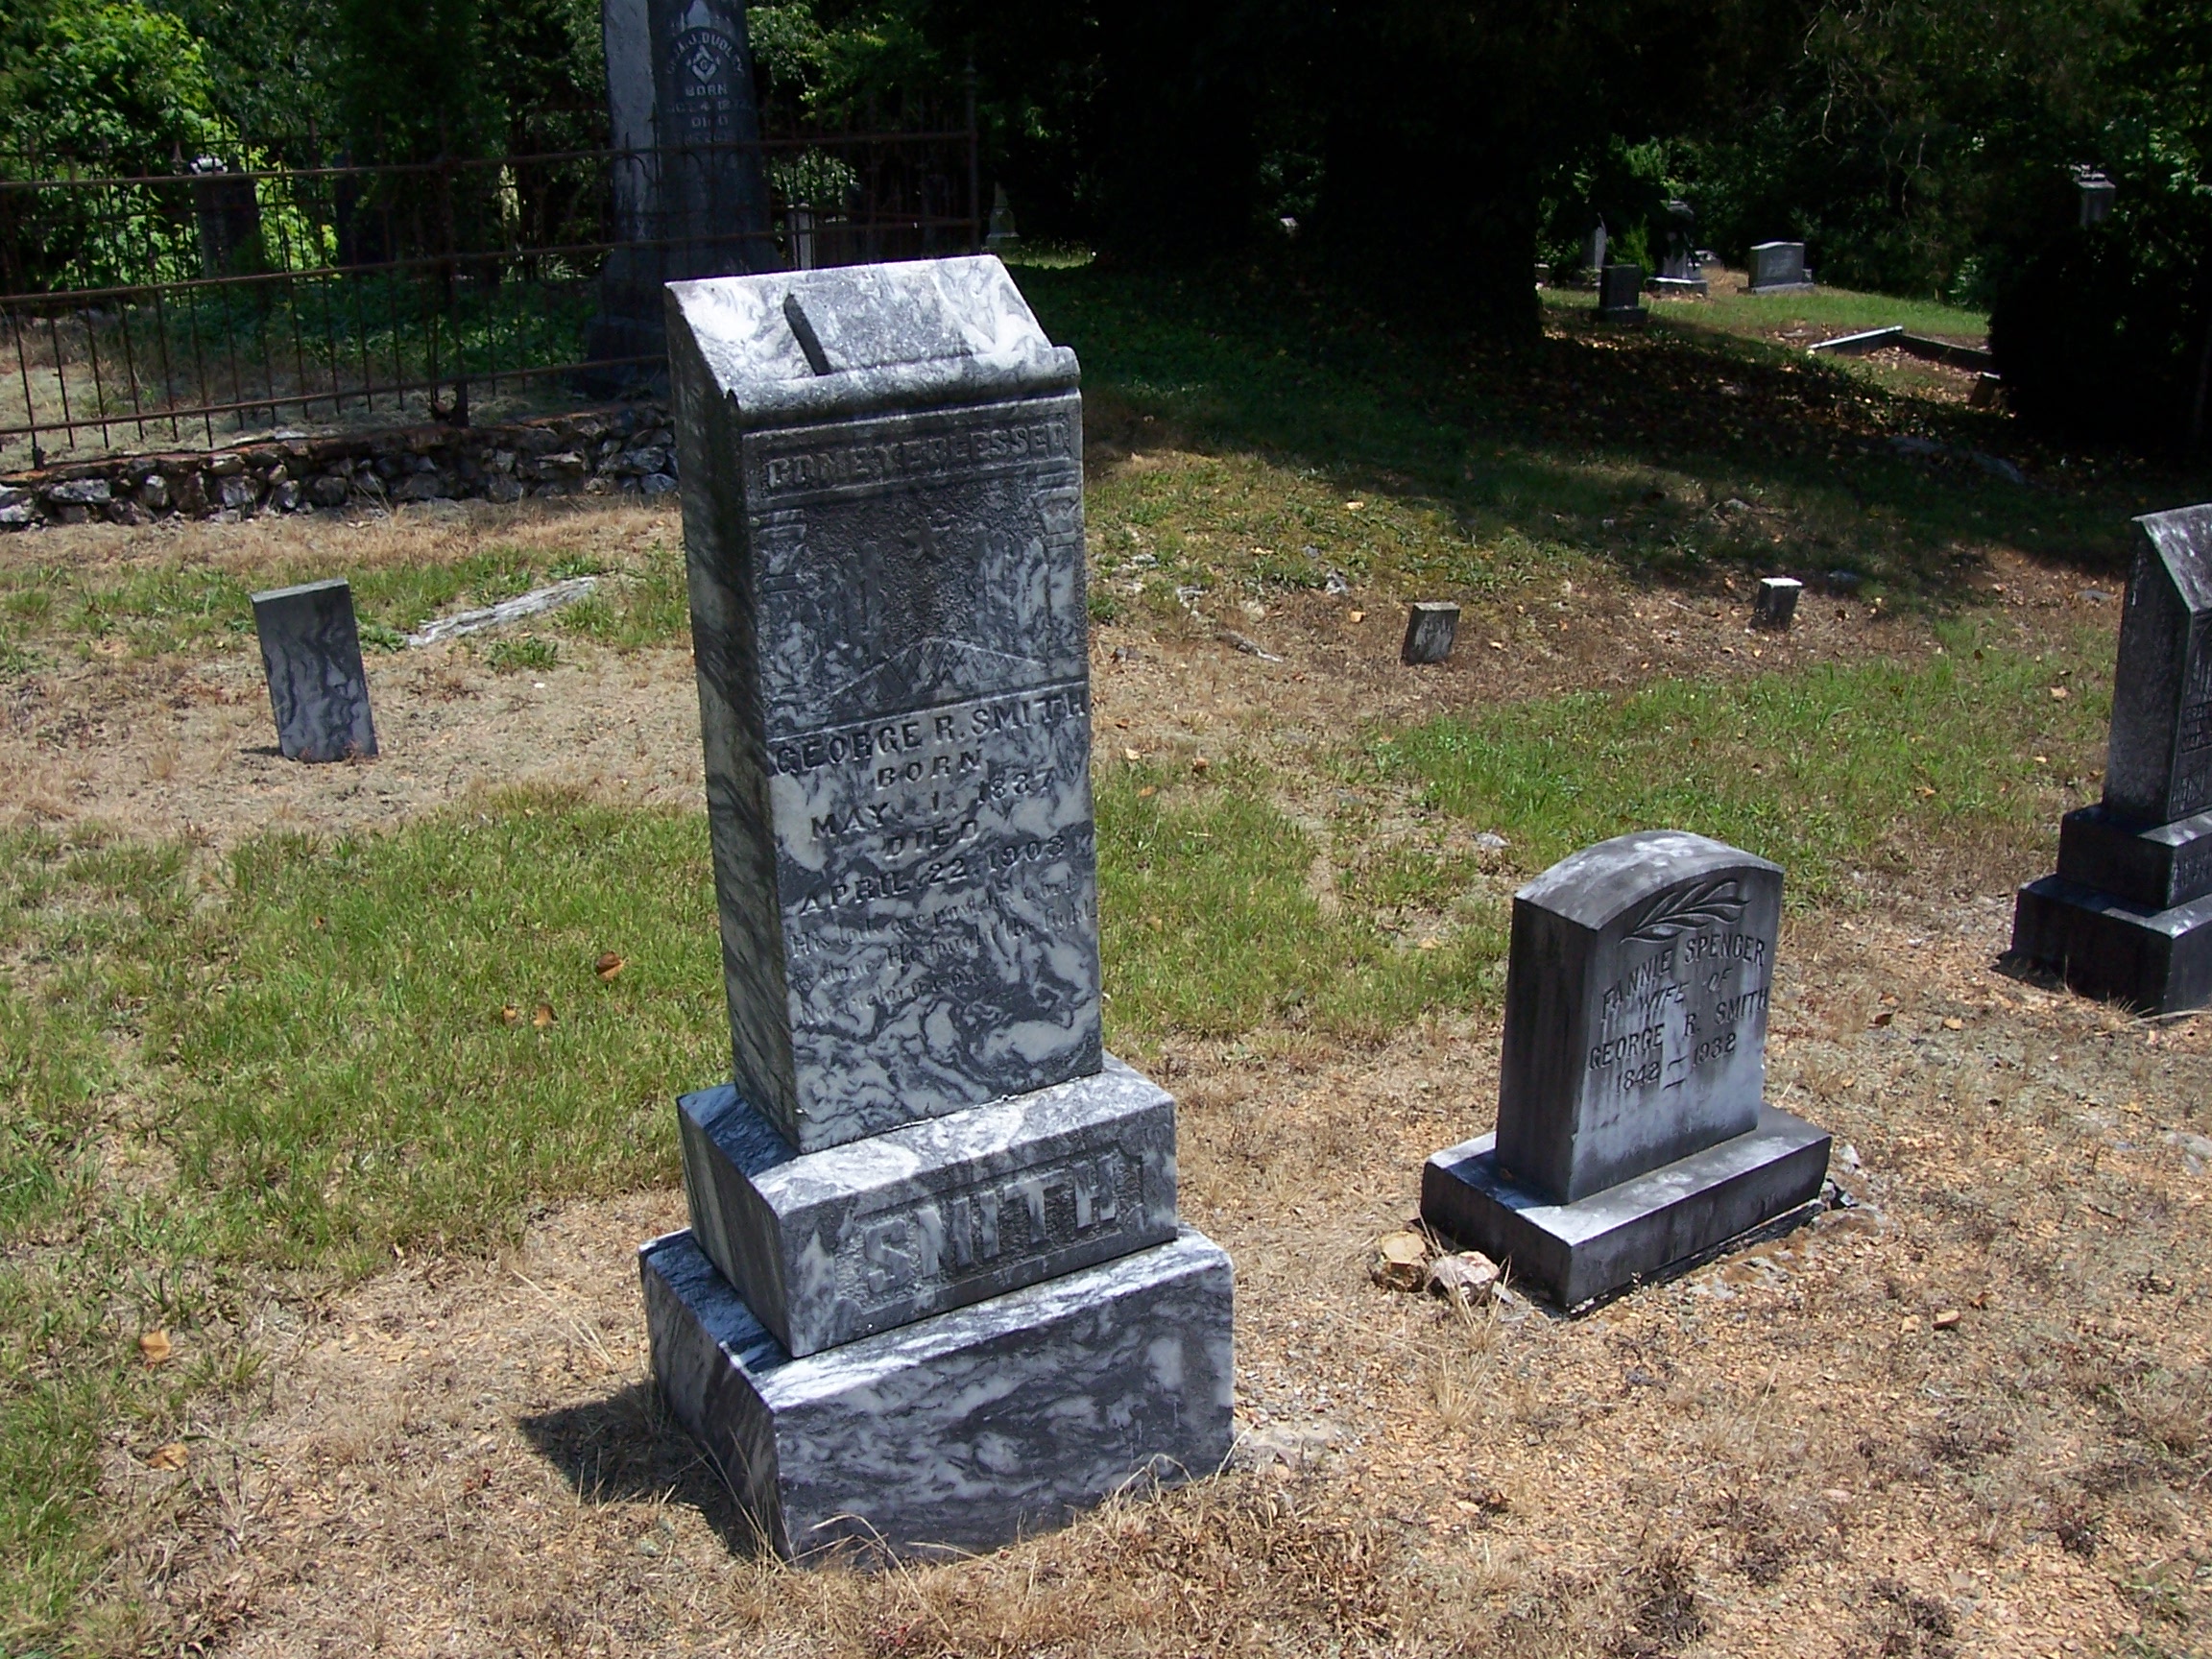 Headstones of George R. Smith and Fannie Smith at Bethlehem Baptist Church in Sonoraville, Gordon County, Georgia